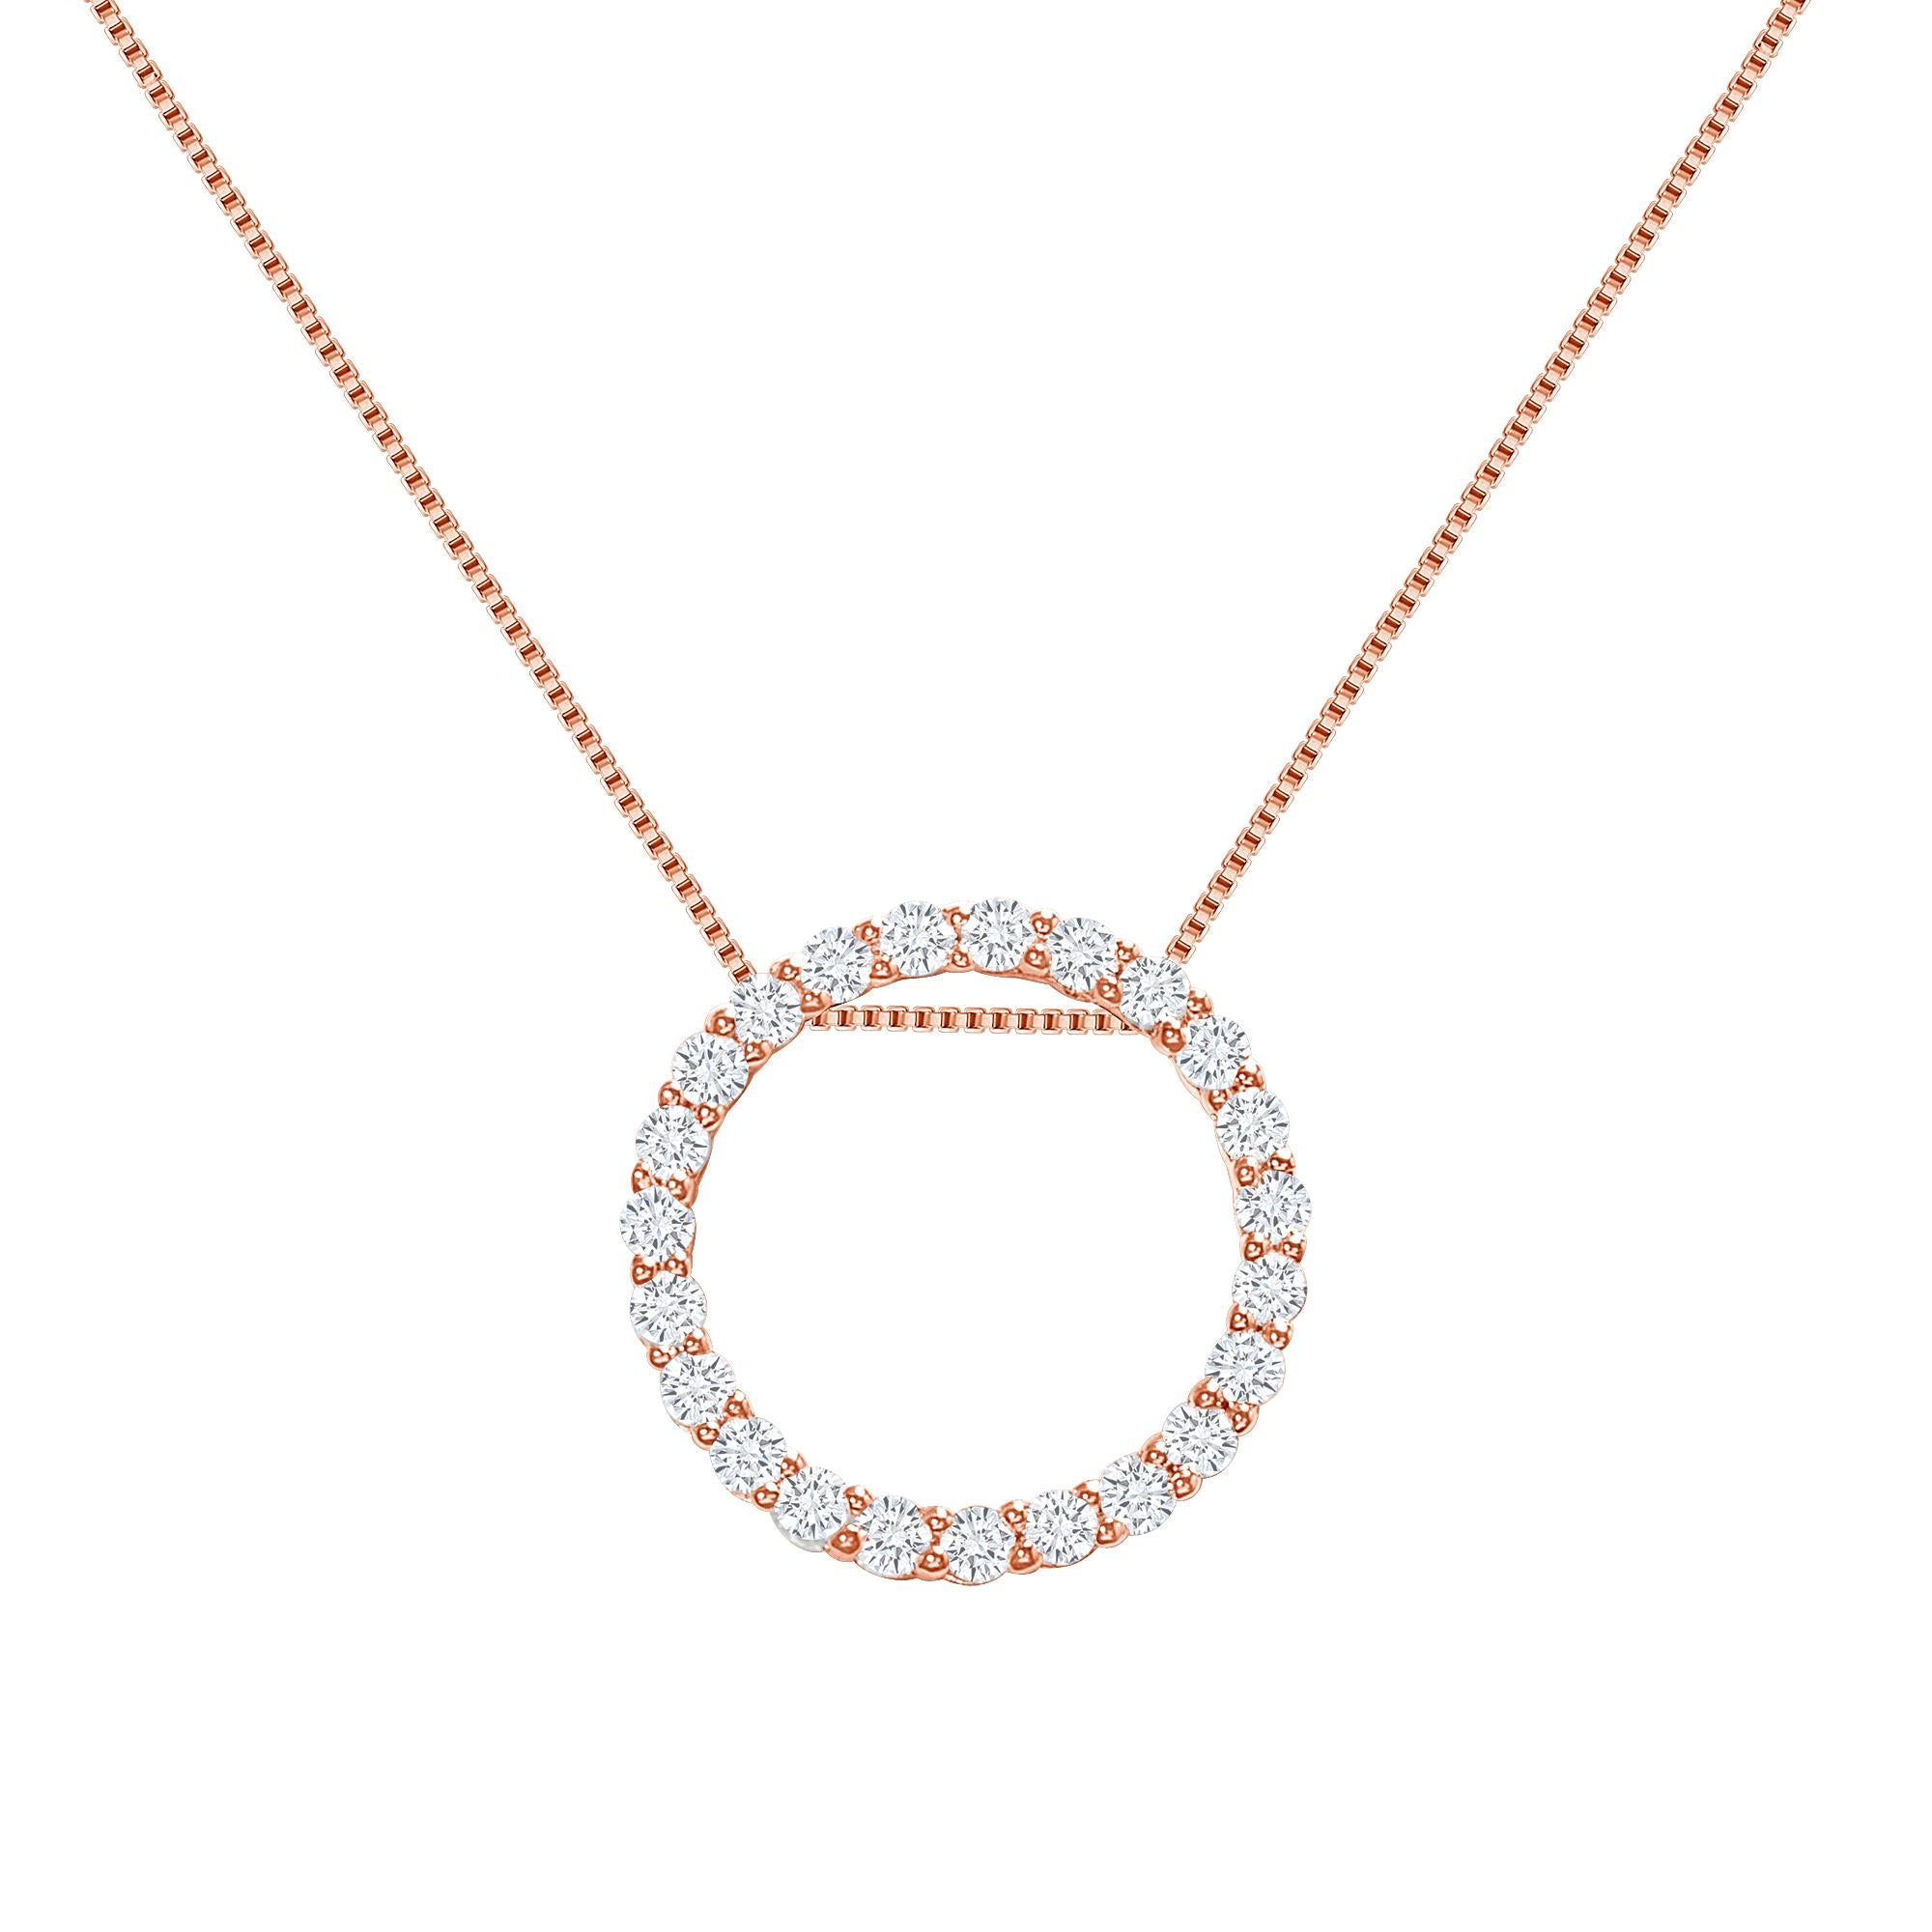 This diamond circle pendant provides a glowing chic look.
Metal: 14k Gold
Diamond Total Carats: 3 carat
Diamond Cut: Round Natural Diamonds (Not Lab Grown)
Diamond Clarity: VS
Diamond Color: F-G
Color: Rose Gold
Necklace Length: 20 inches